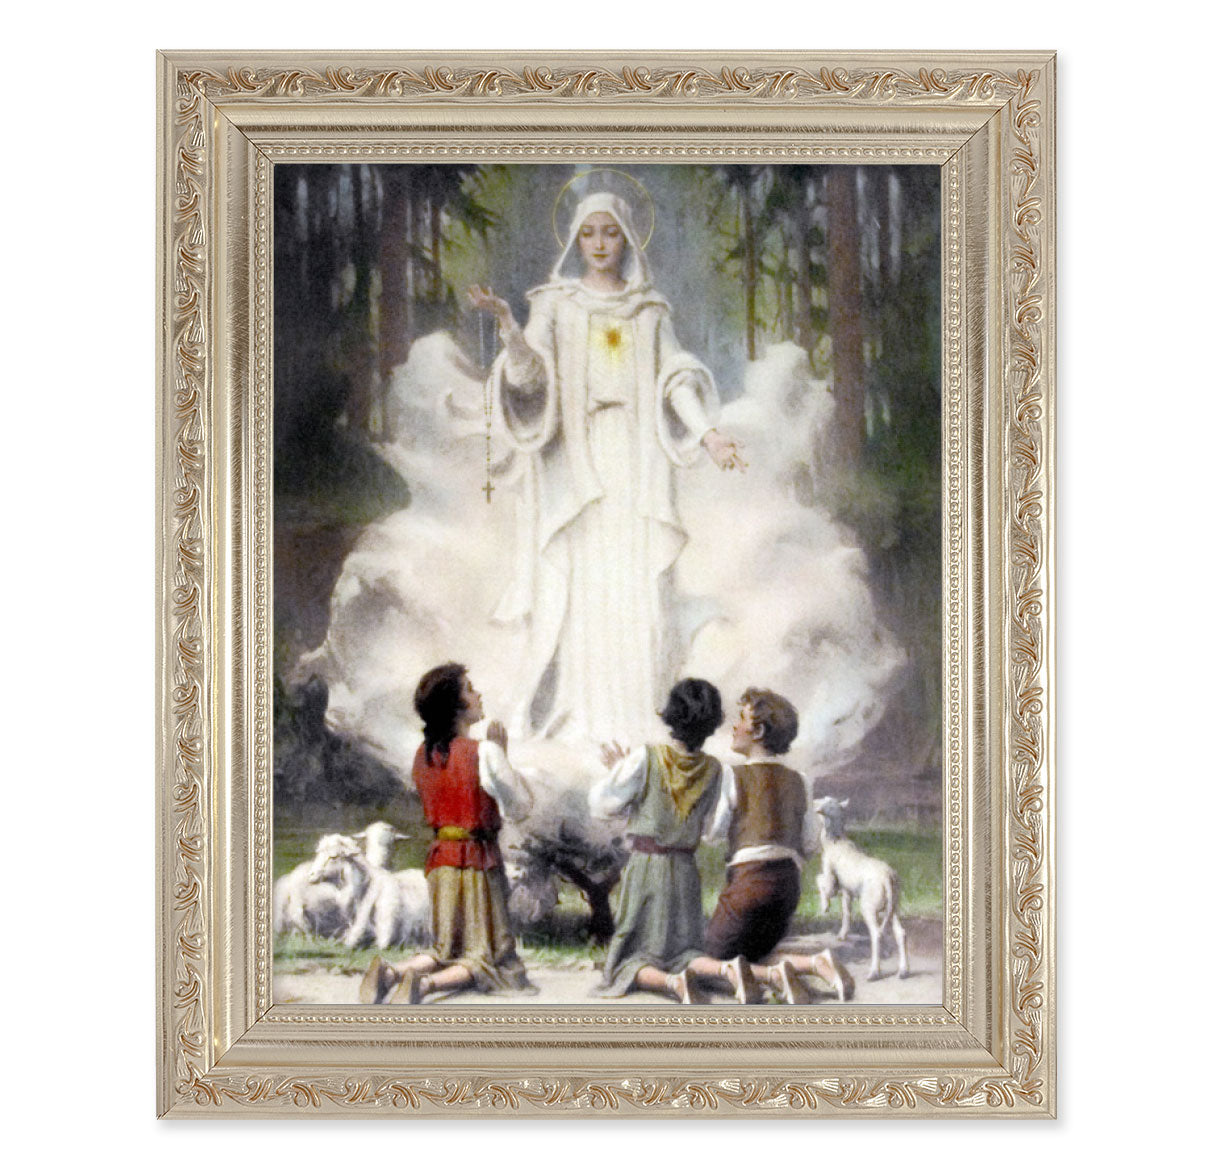 Our Lady of Fatima Antique Silver Framed Art